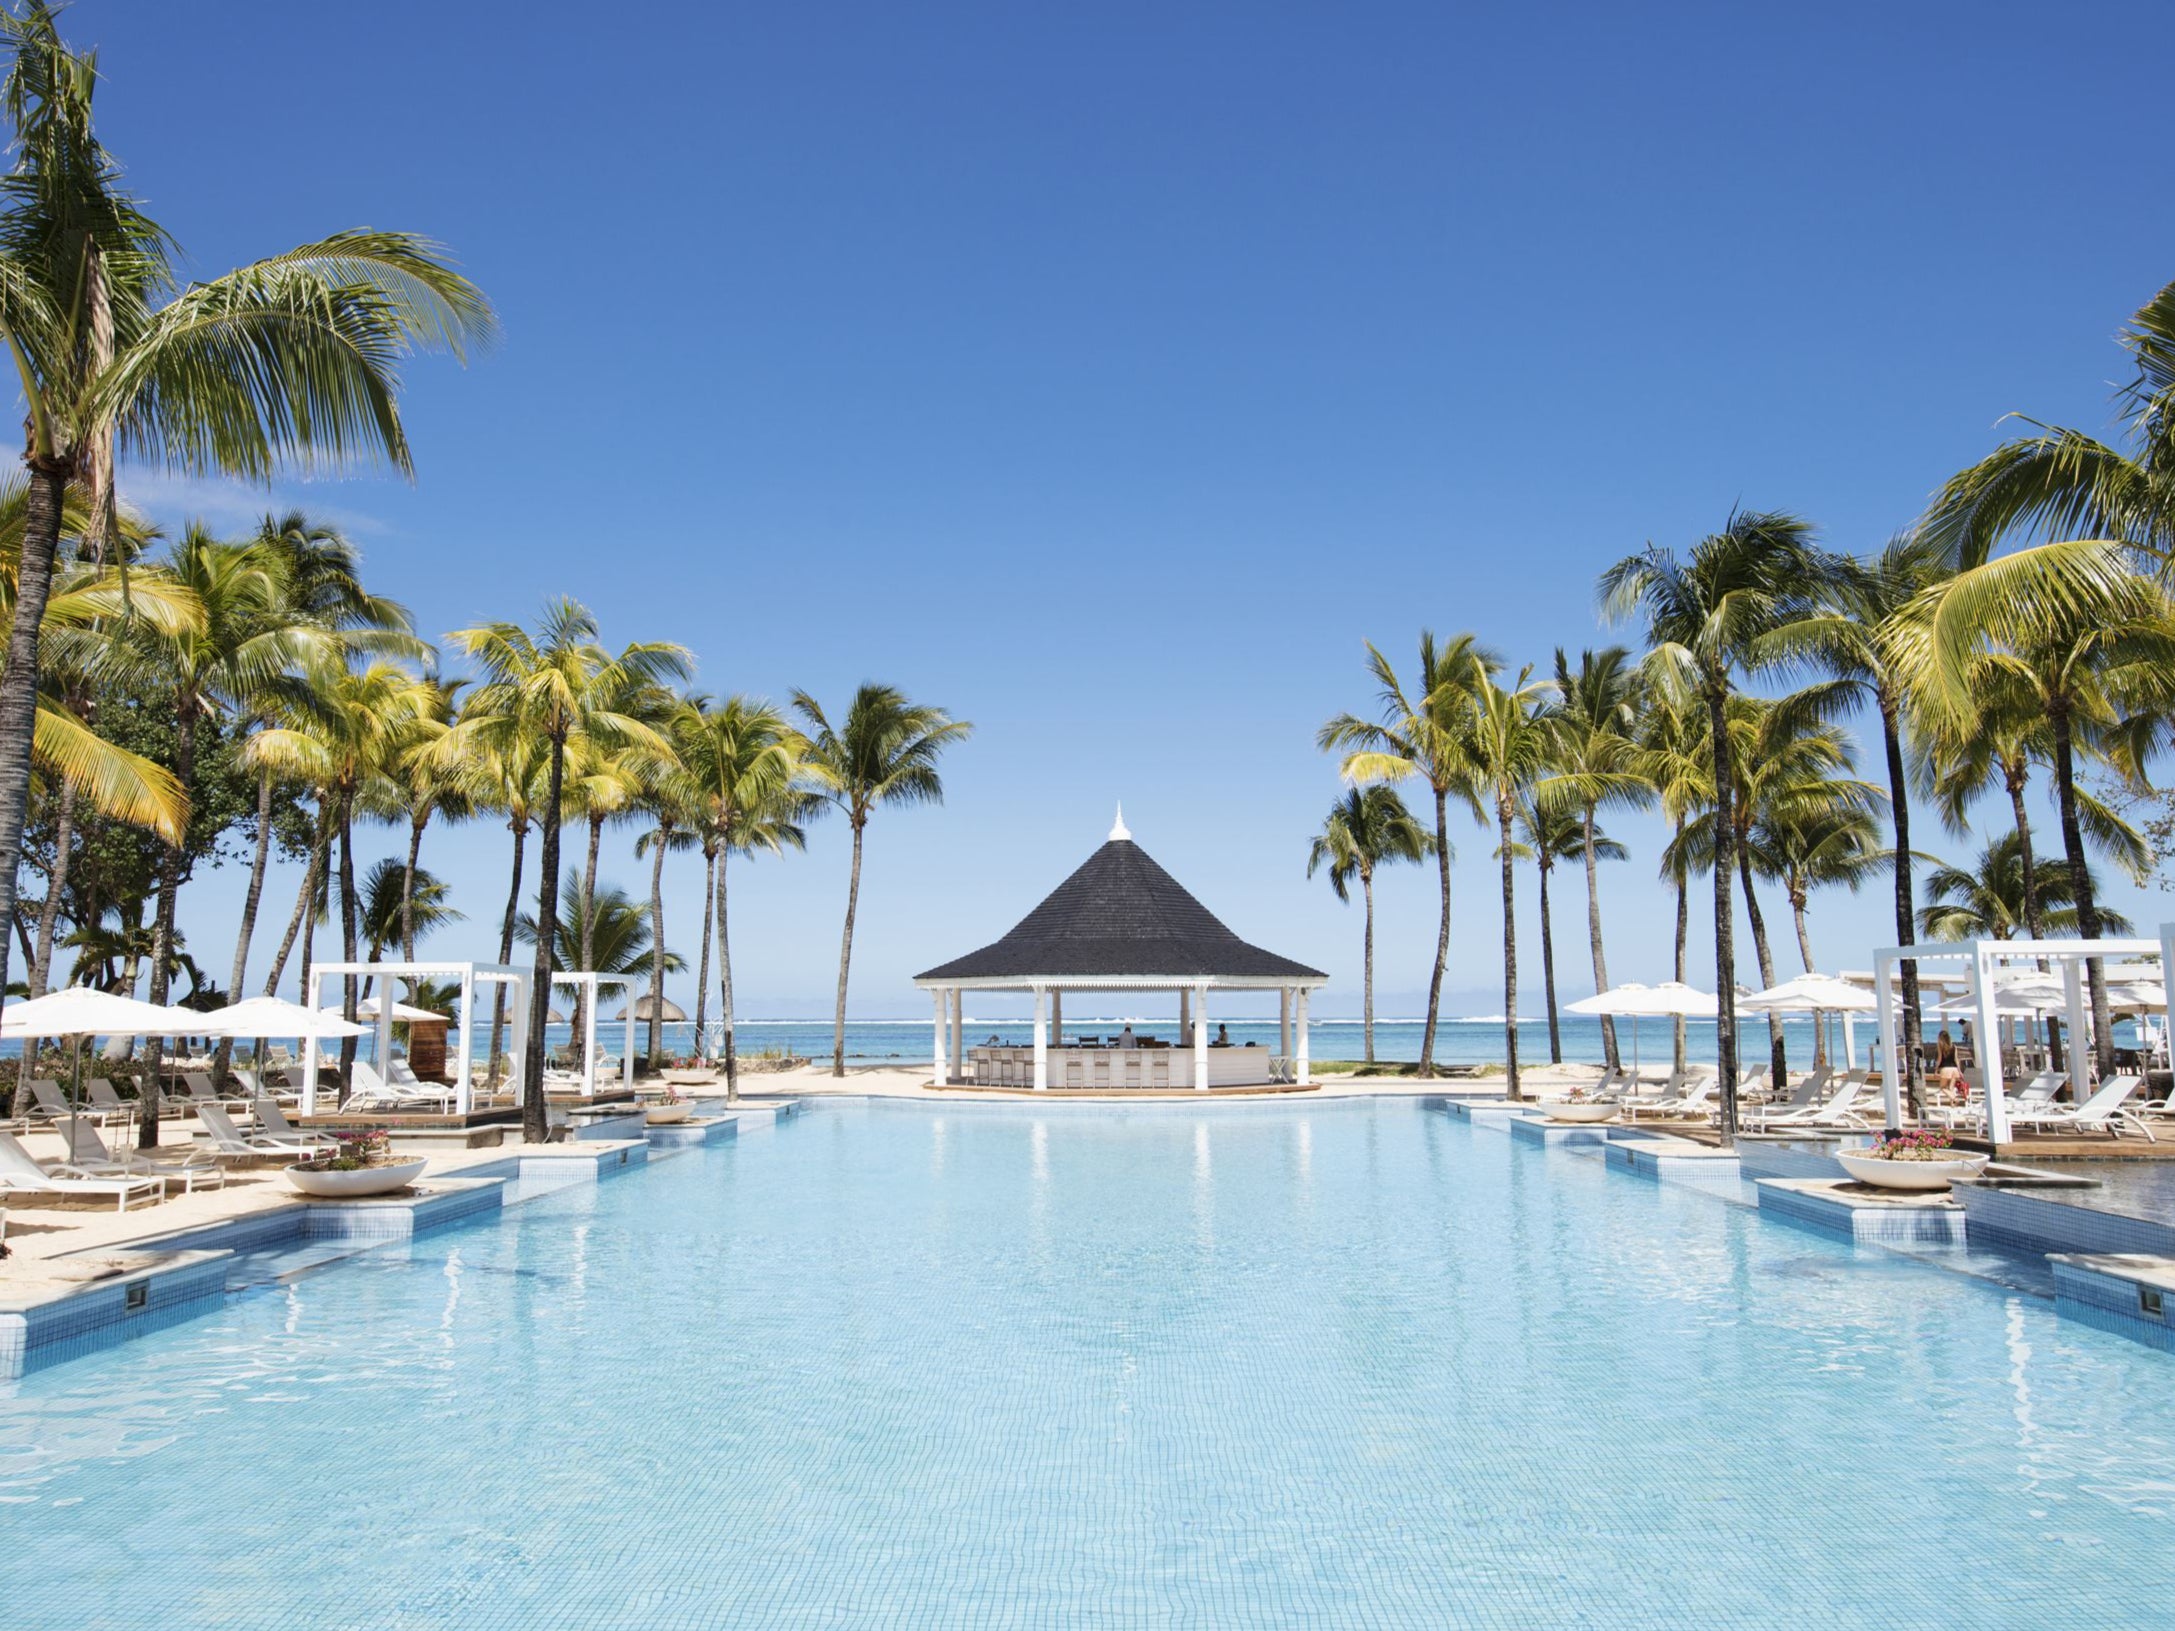 Heritage Le Telfair is the first Mauritius hotel to offer carbon-neutral stays